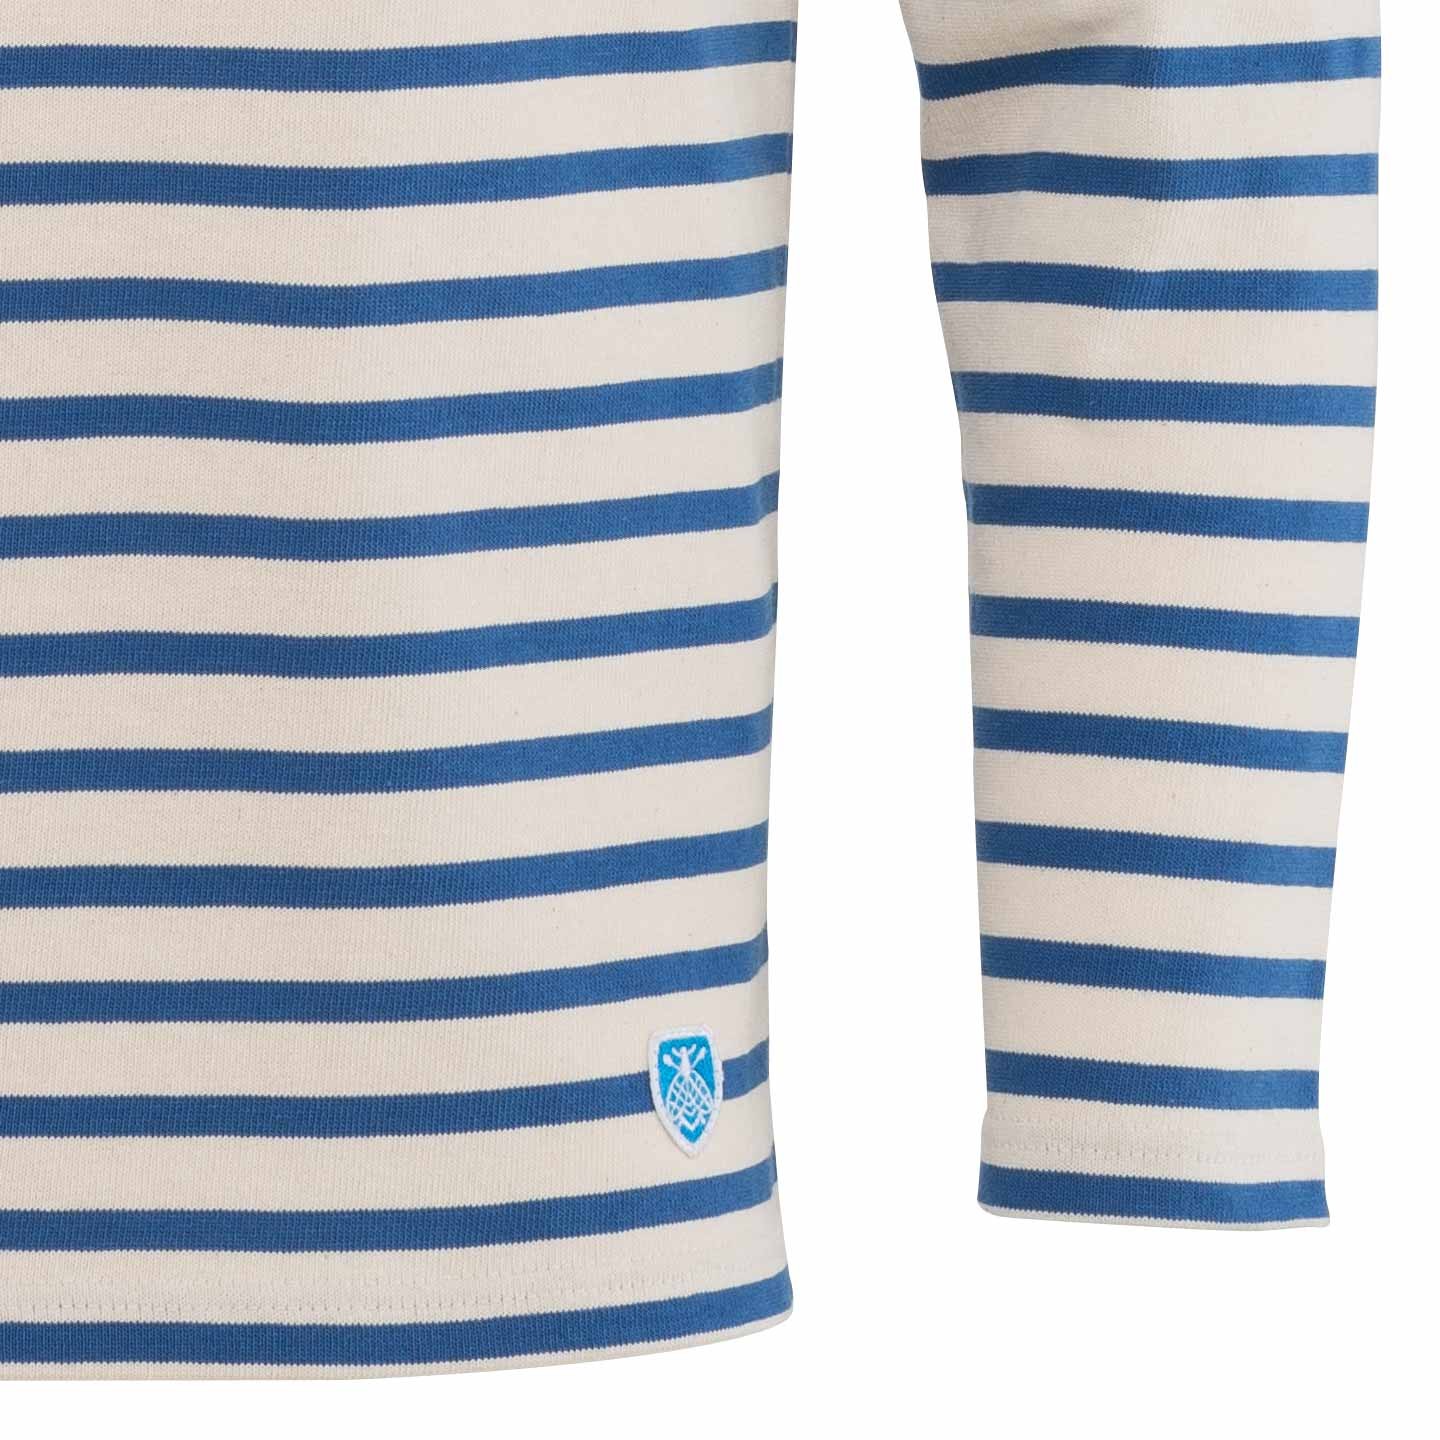 Striped shirt Écru / Océan unisex 100% made in France Orcival